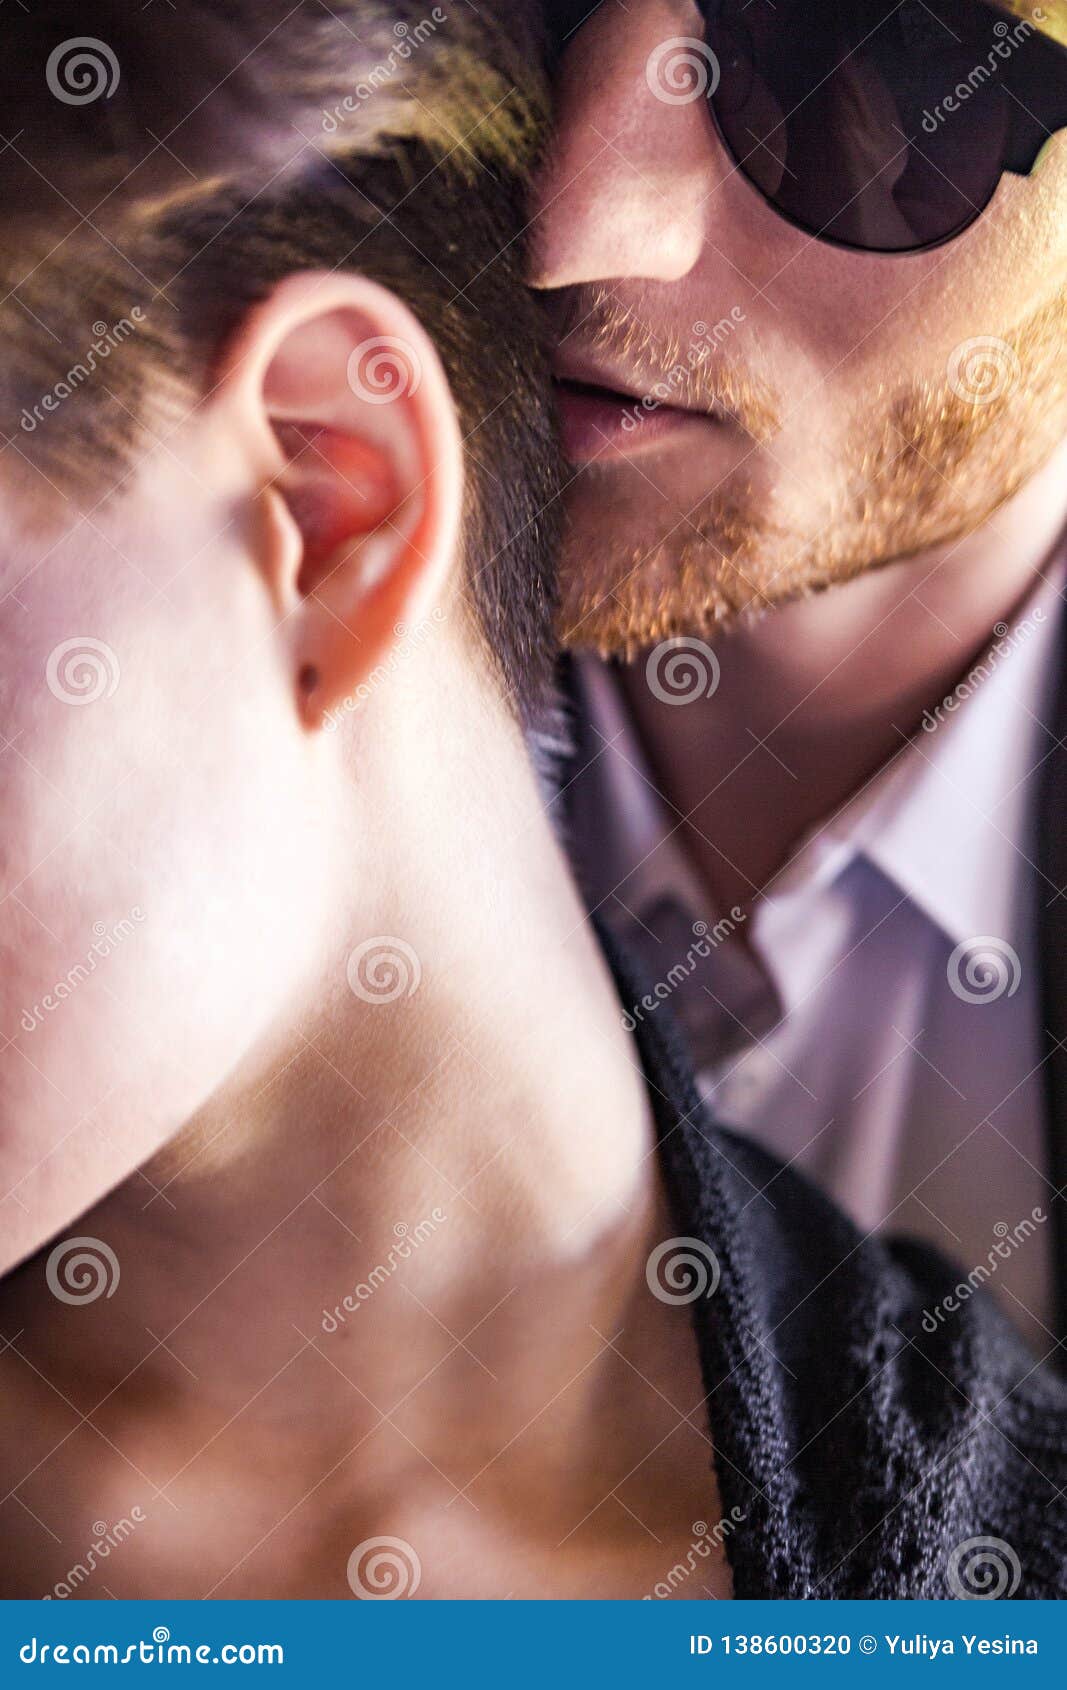 Where to kiss a girl on the neck